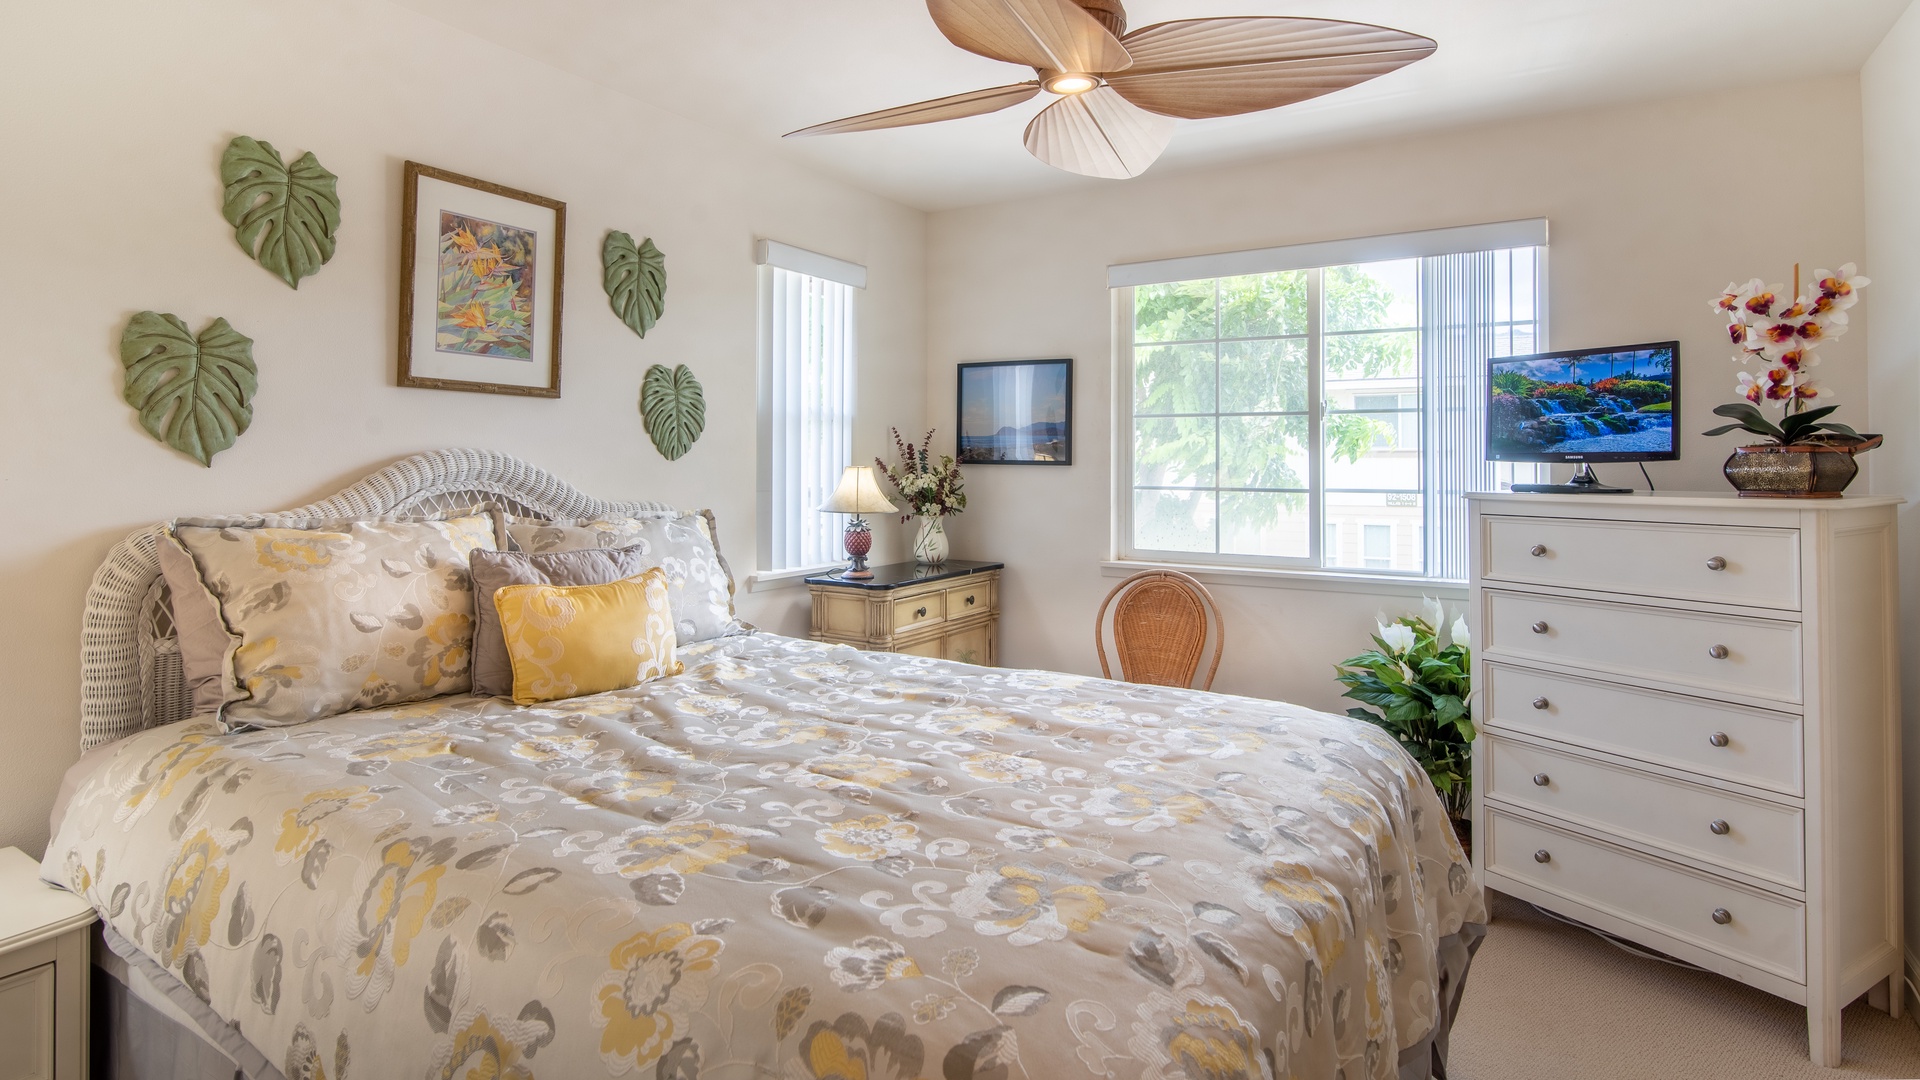 Kapolei Vacation Rentals, Hillside Villas 1538-2 - The second guest bedroom with a ceiling fan and soft linens.